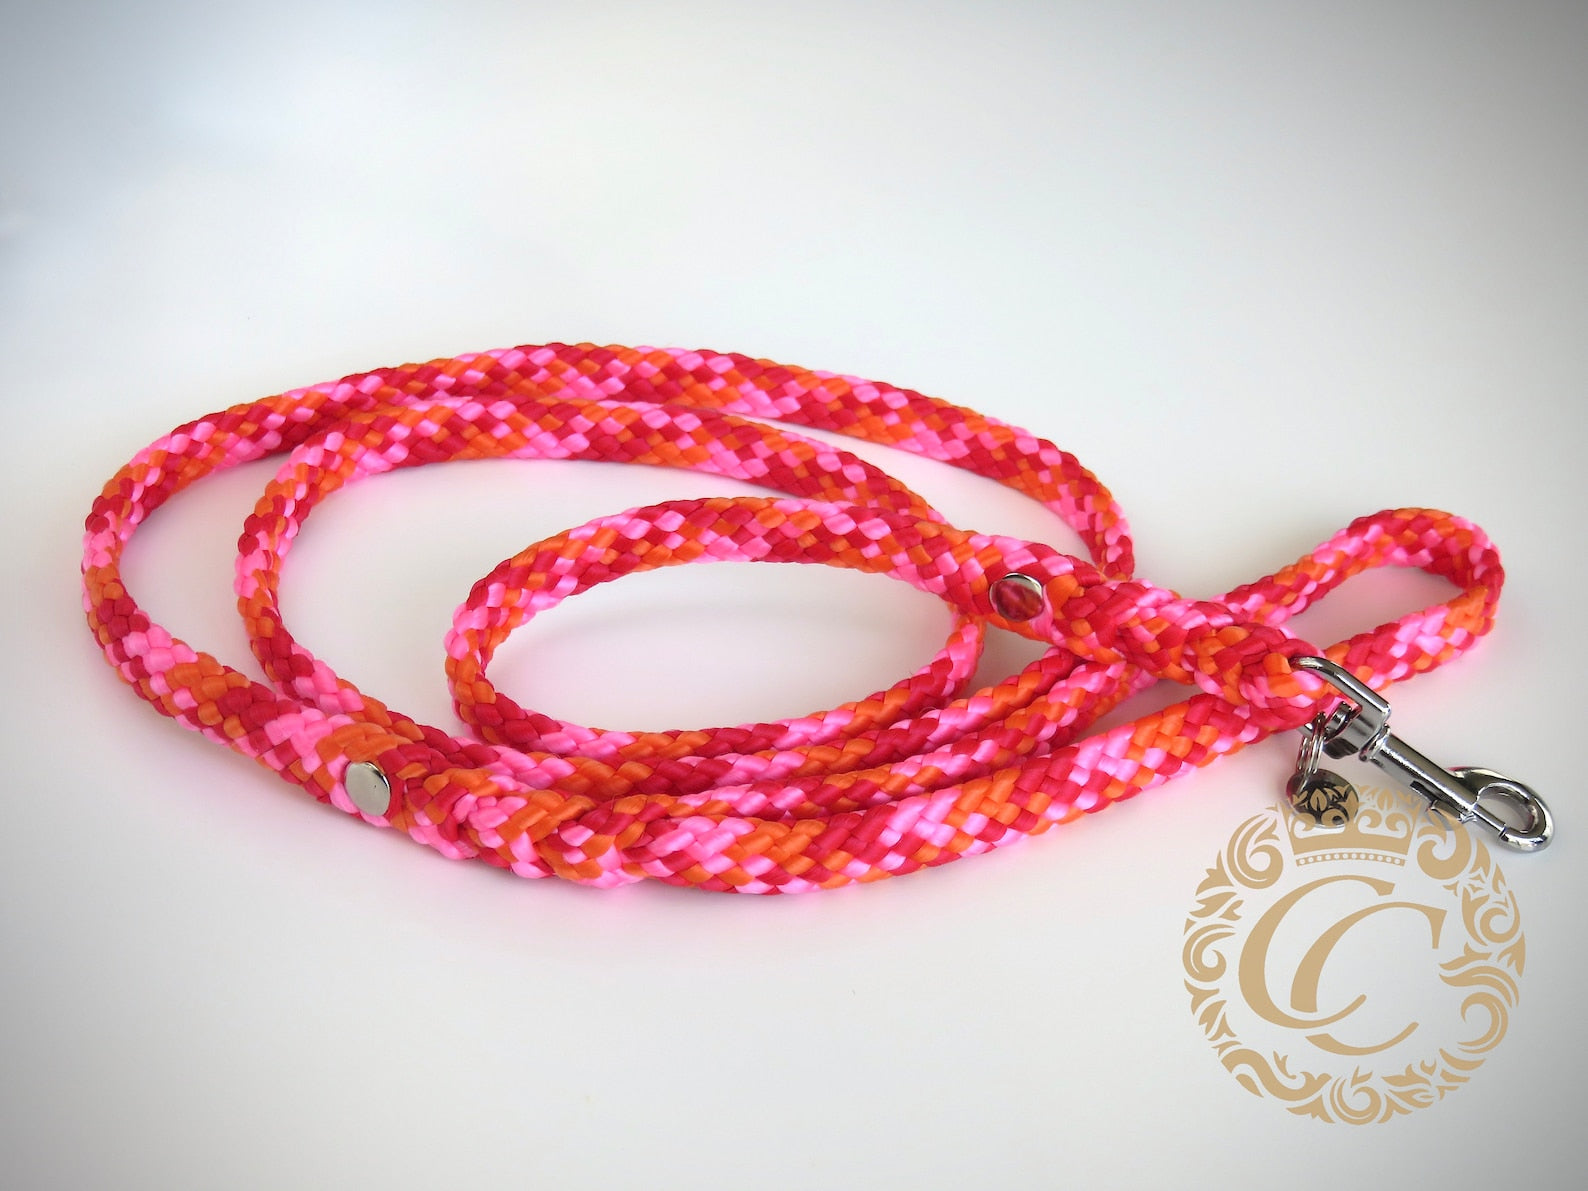 Dog leash for small & medium dogs Red Pink Orange | Paracord leashes | CollarCrafts | Dog leash paracord | washable leashes | leibanden | honden leibanden | Collars and leashes | CollarCrafts | red dog leash | dog lead | hondenleiband | honden leibandband | small leashes | ppm leashes | custom made leashes | cat leash | thin leashes